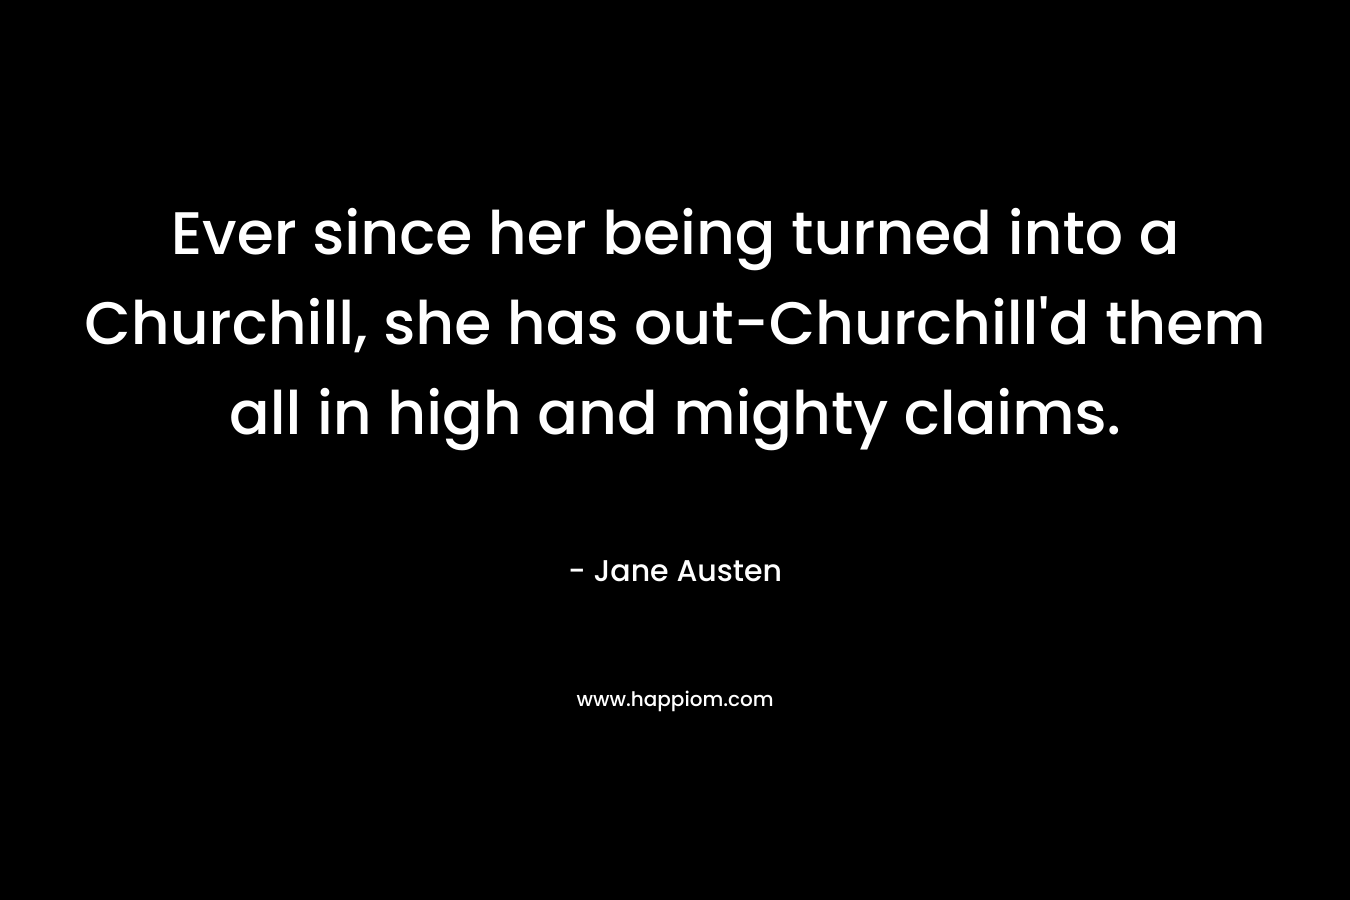 Ever since her being turned into a Churchill, she has out-Churchill’d them all in high and mighty claims. – Jane Austen